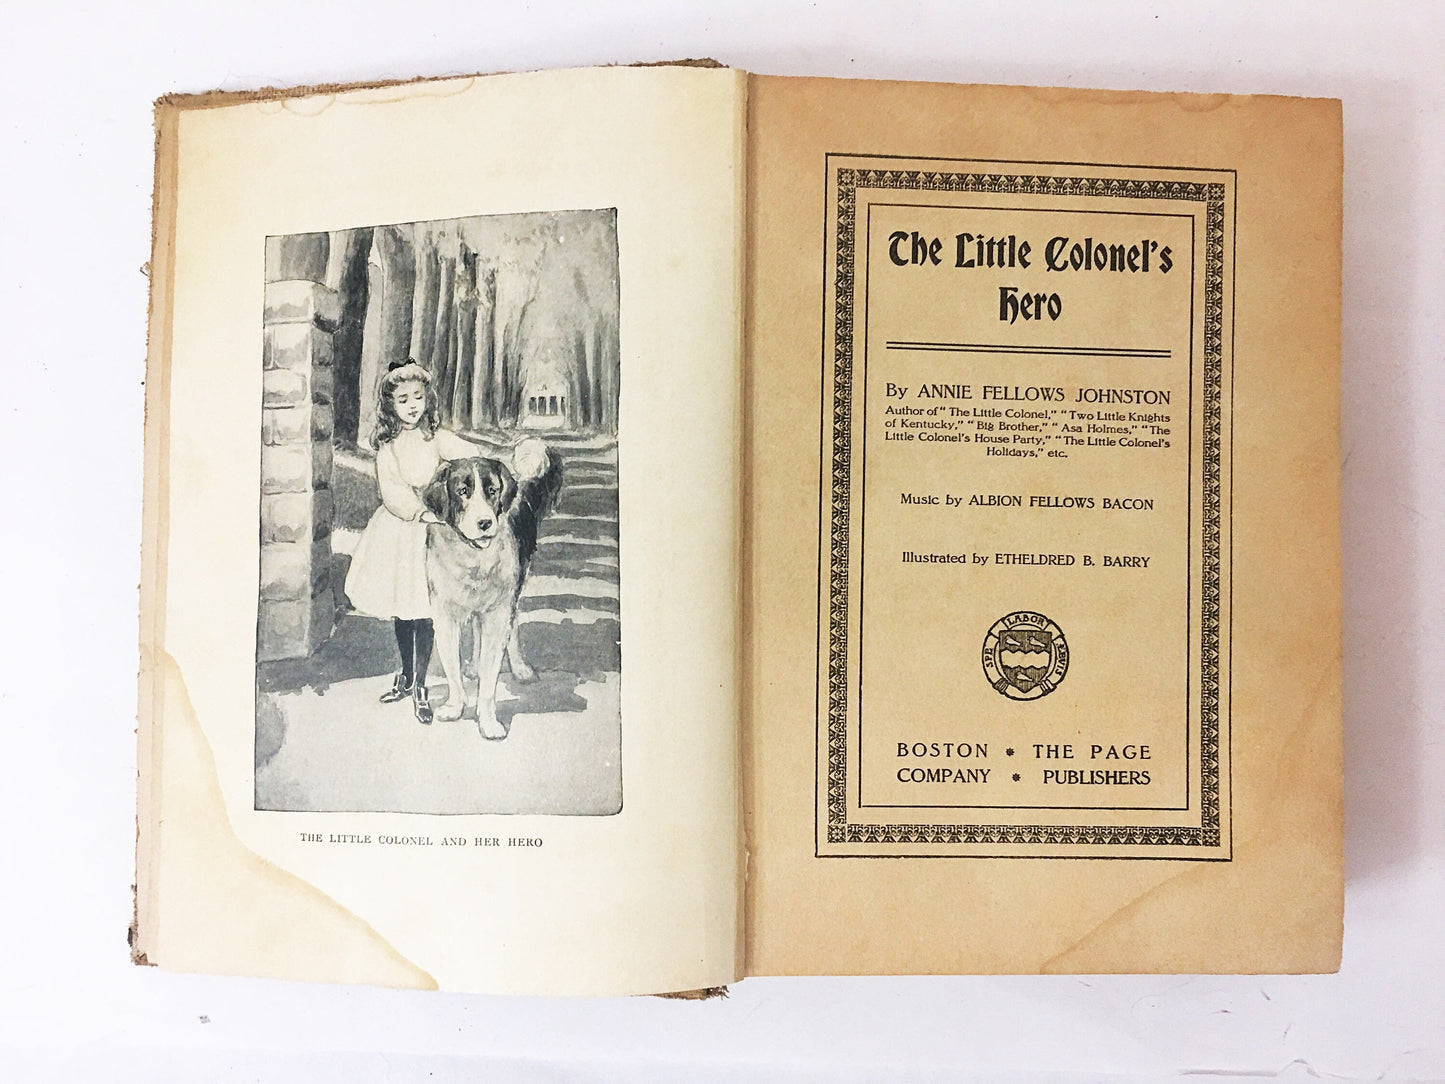 1925 Little Colonels Hero Vintage book by Annie Fellows Johnston. Made into movie with Shirley Temple, Bill Bojangles Robinson Colonel's